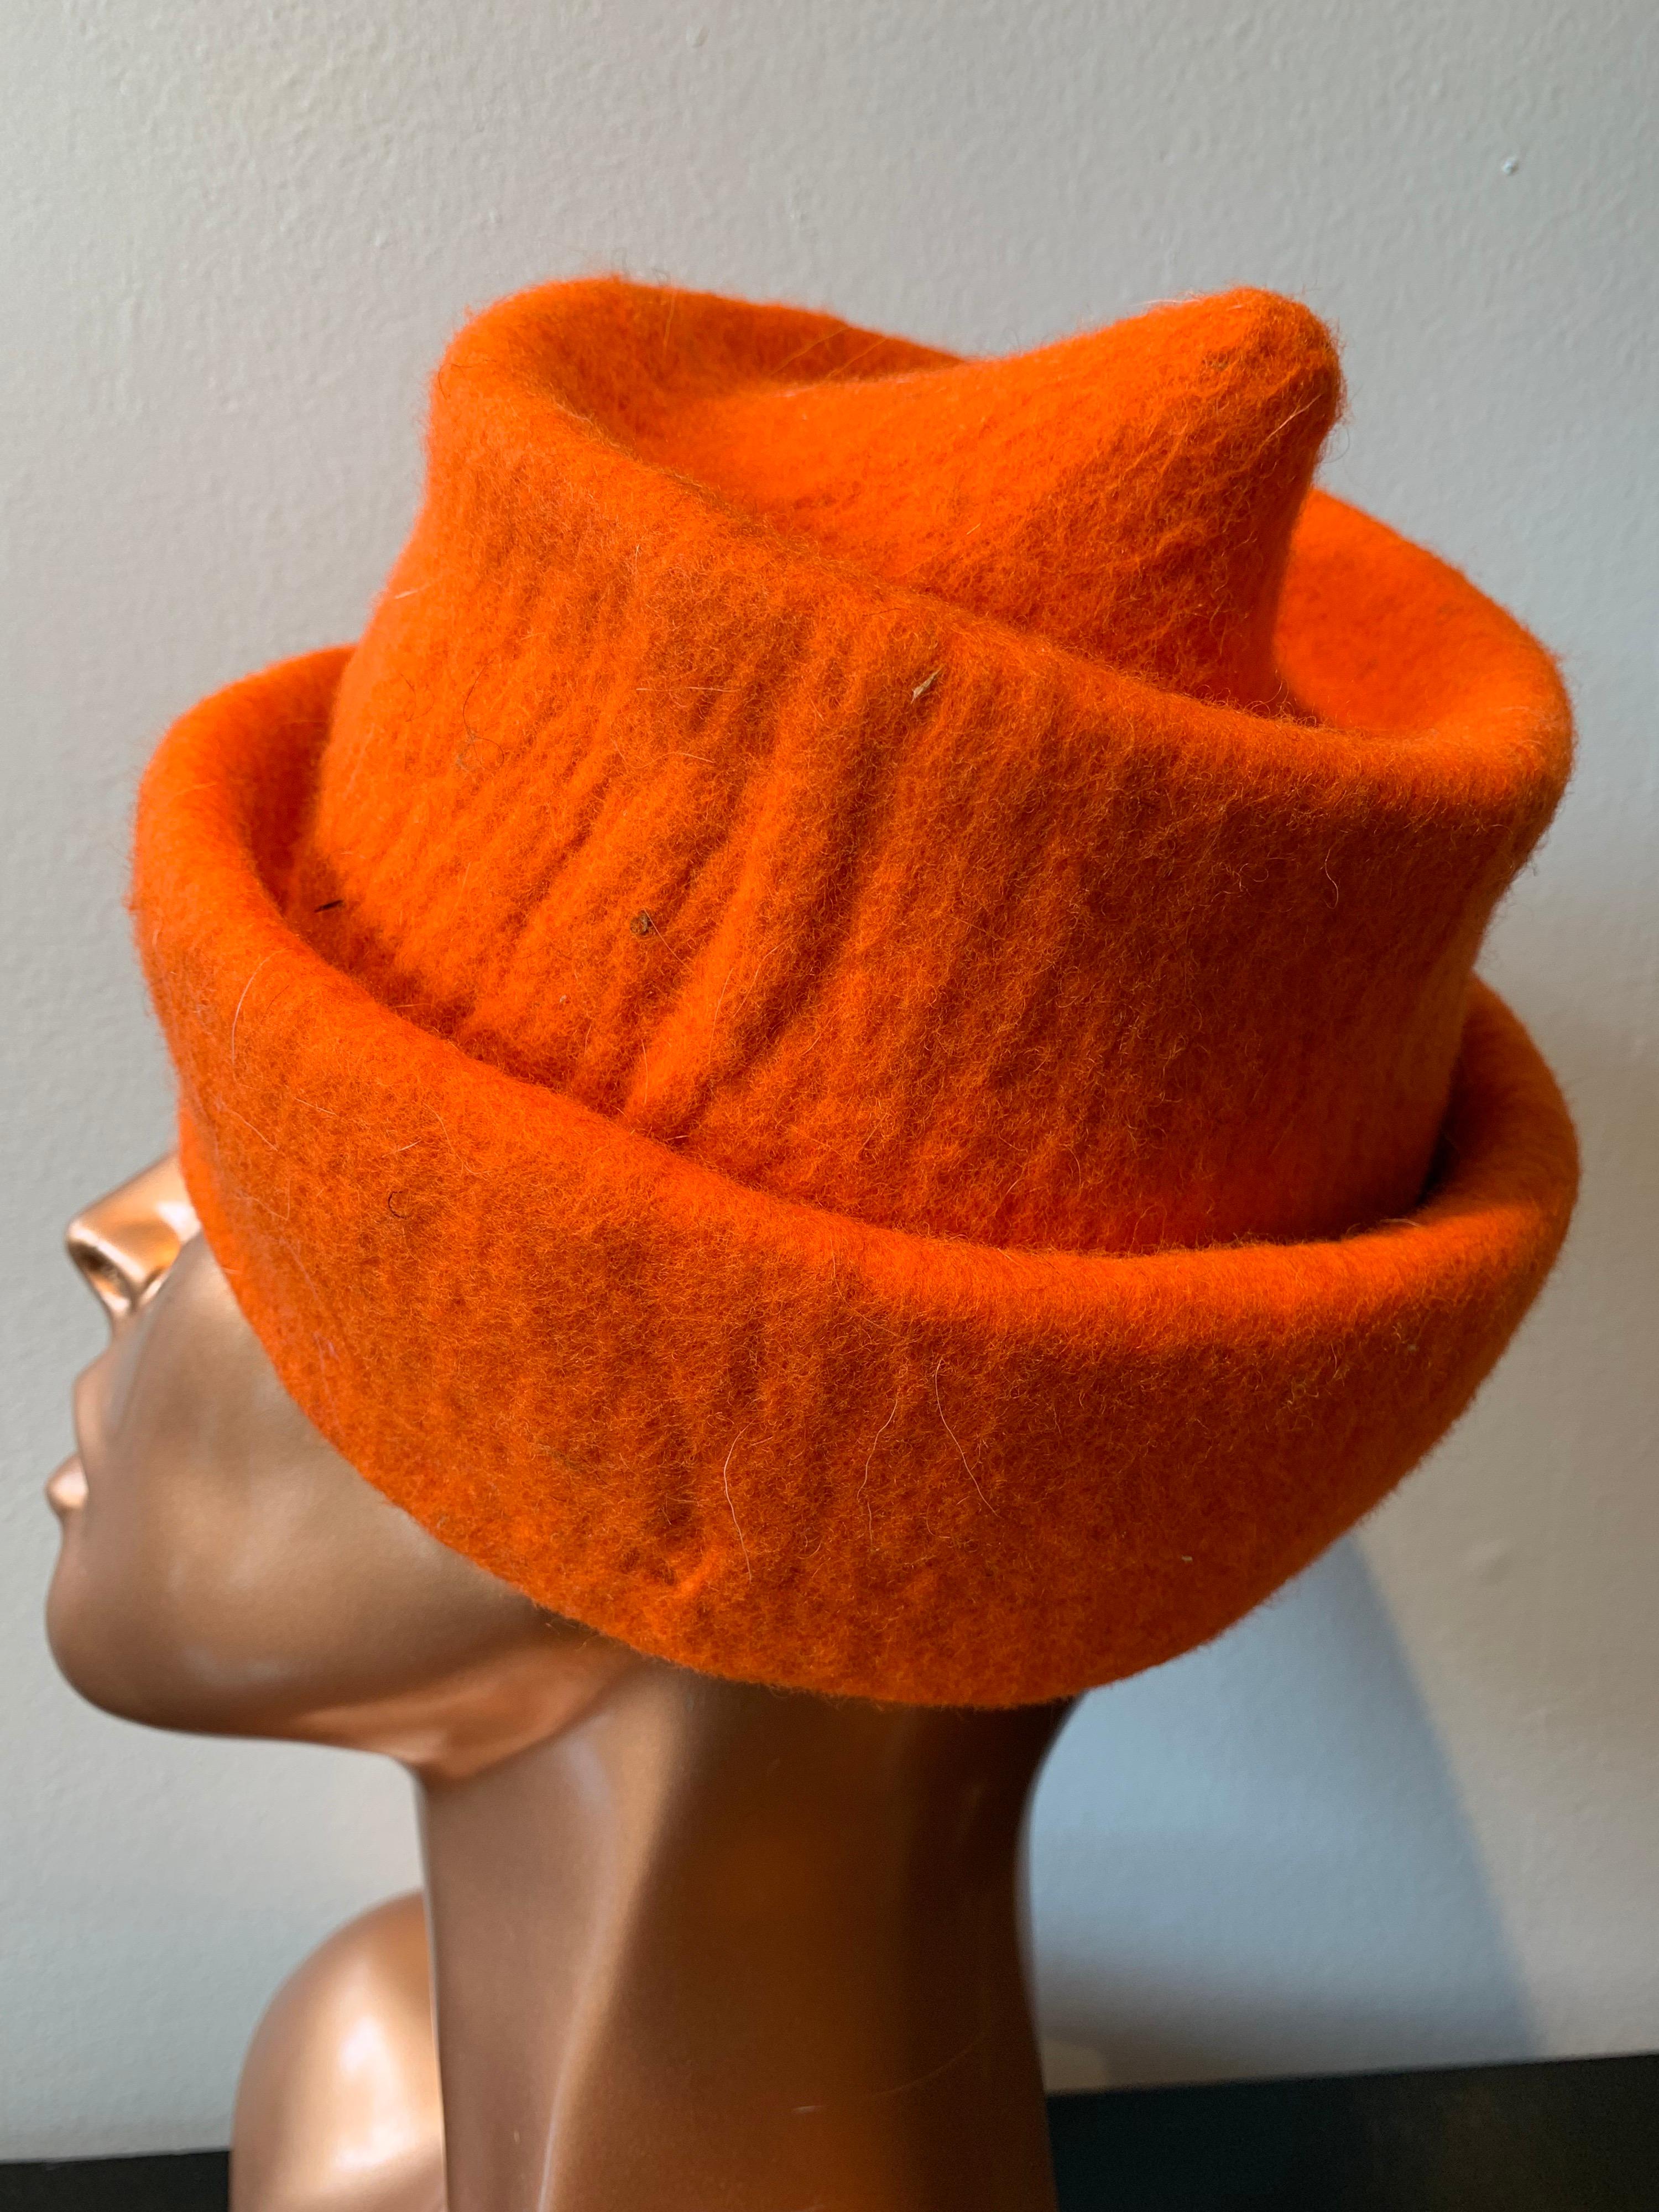 1980s Erratica by Jean Hicks Vibrant Orange Molded Wool Felt Pagoda Shaped Hat. Made in Seattle. Art to wear. Perfect compliment to our Genny Coat by Gianni Versace in coordinating color! See listings.